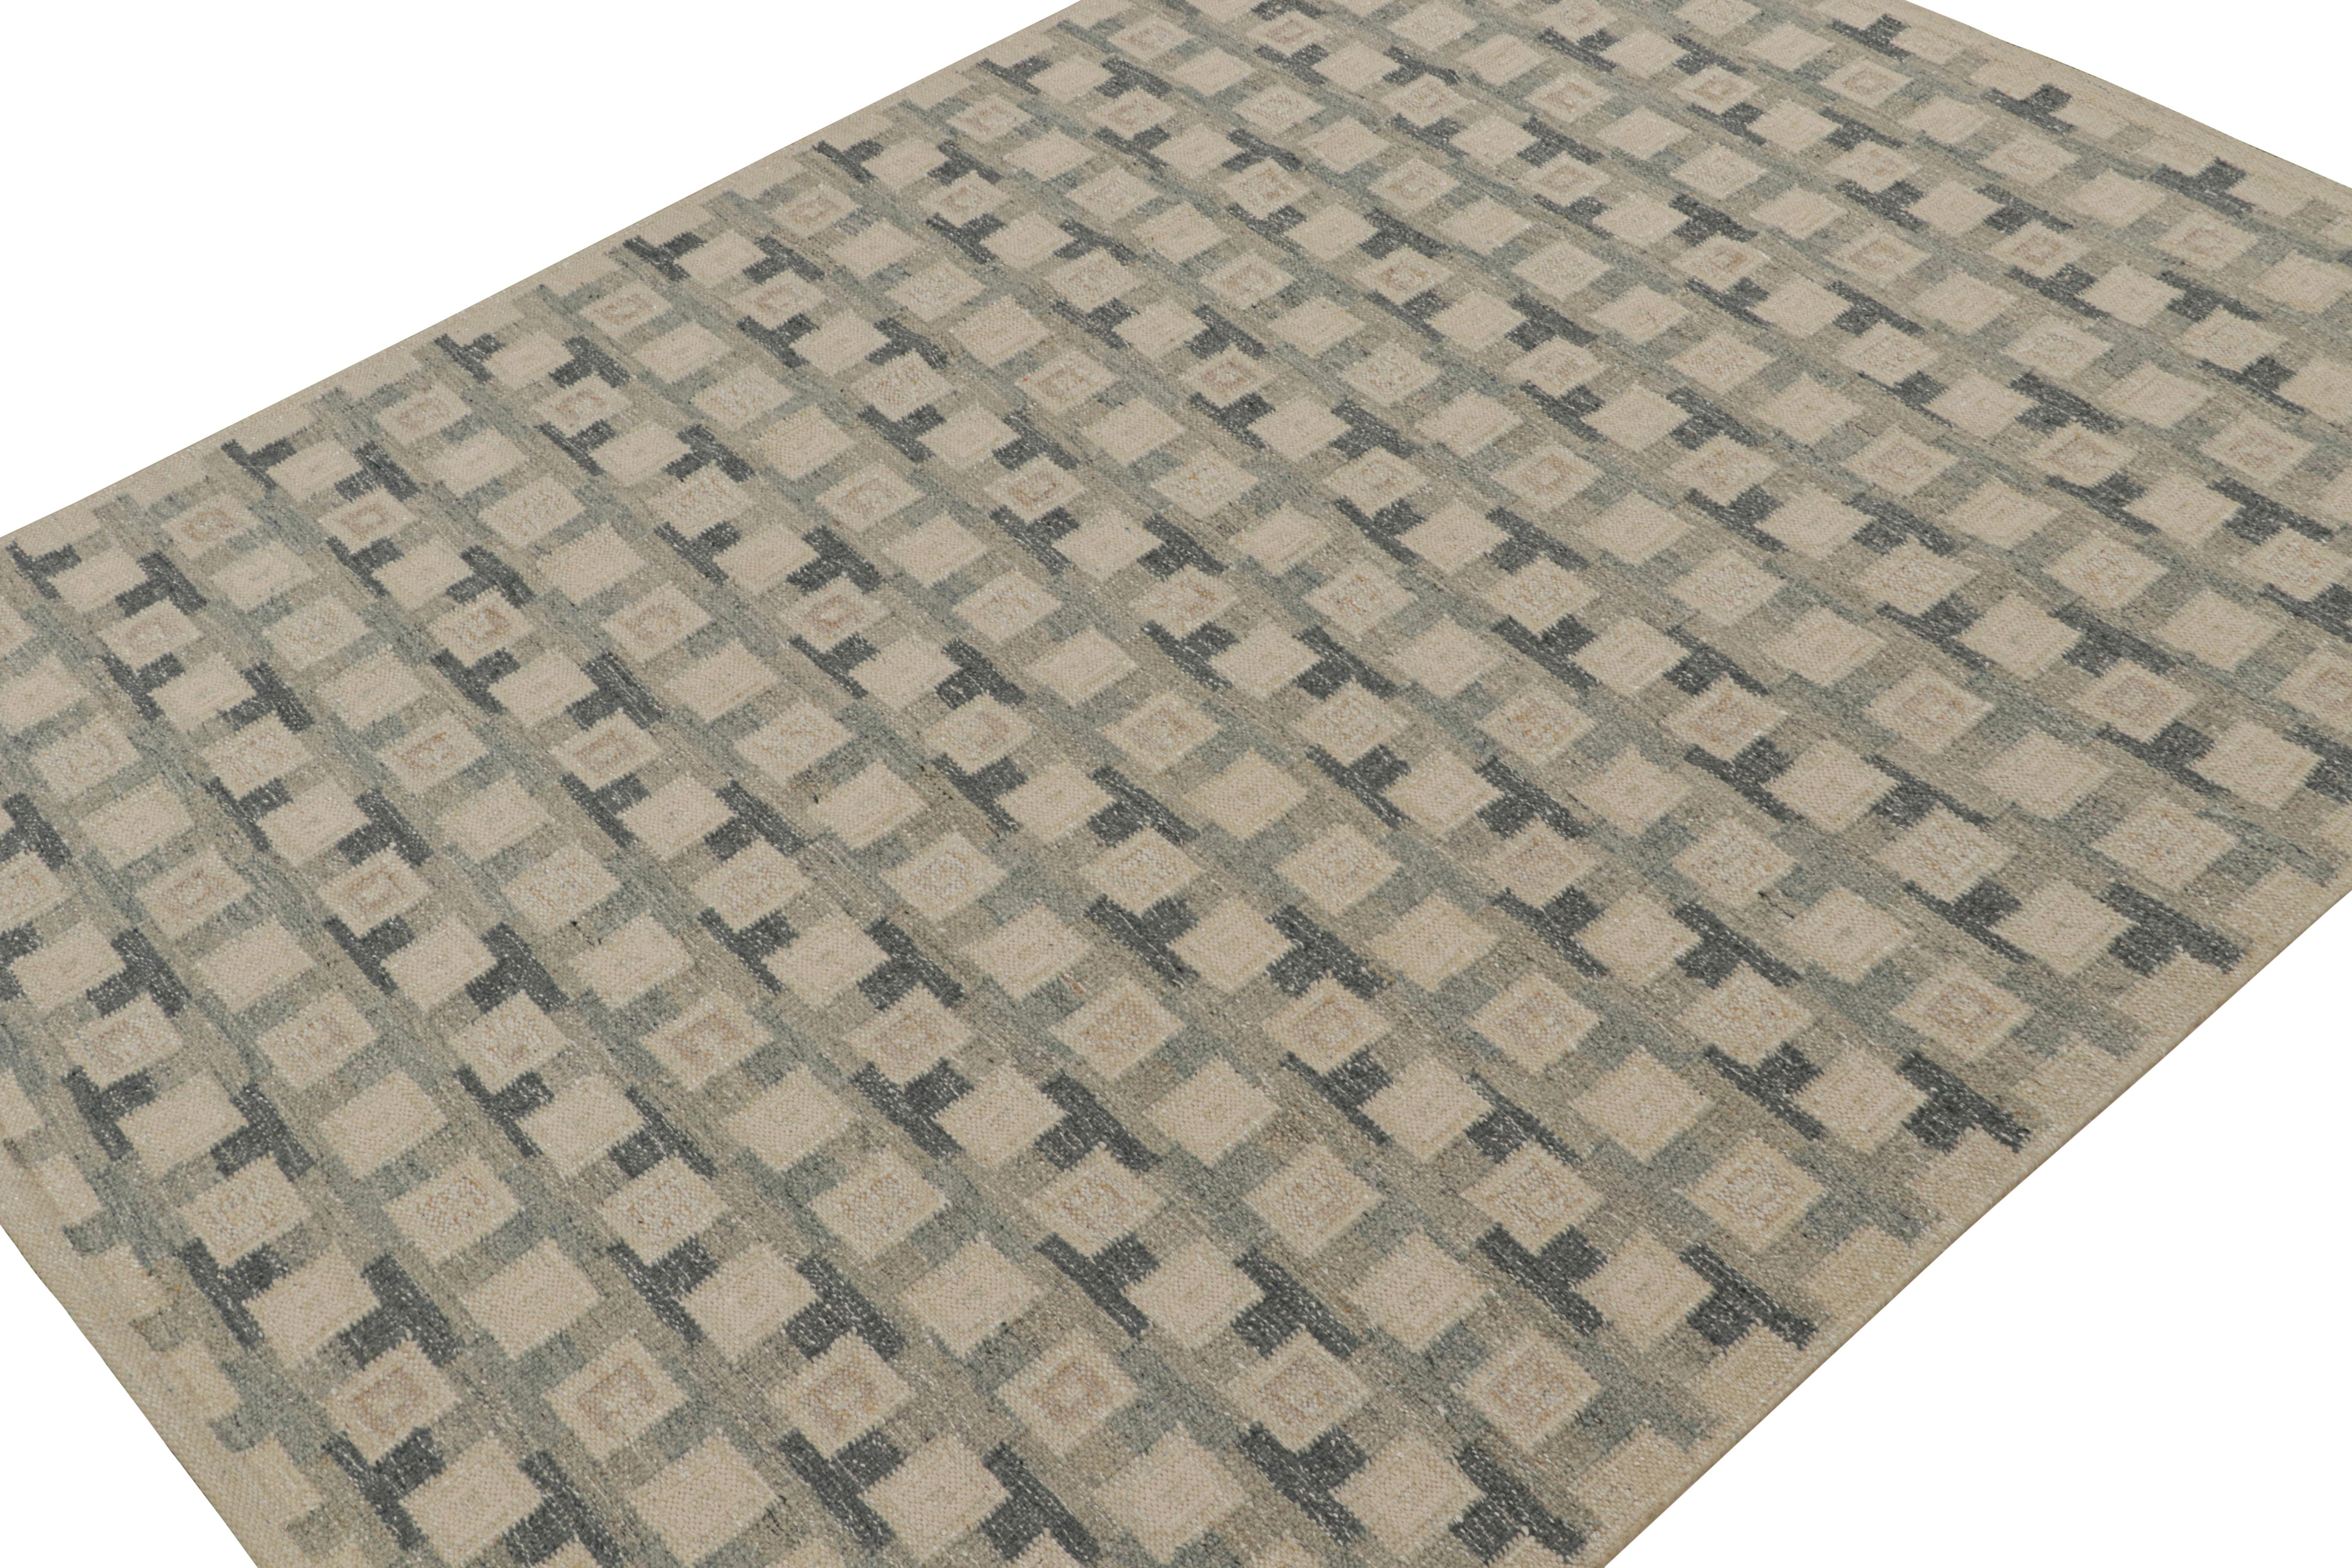 A smart 9x12 Swedish style custom kilim rug from our award-winning Scandinavian flat weave collection. Handwoven in wool, cotton & undyed natural yarn.

On the Design: 

This rug enjoys geometric patterns in beige & gray. Keen eyes will admire